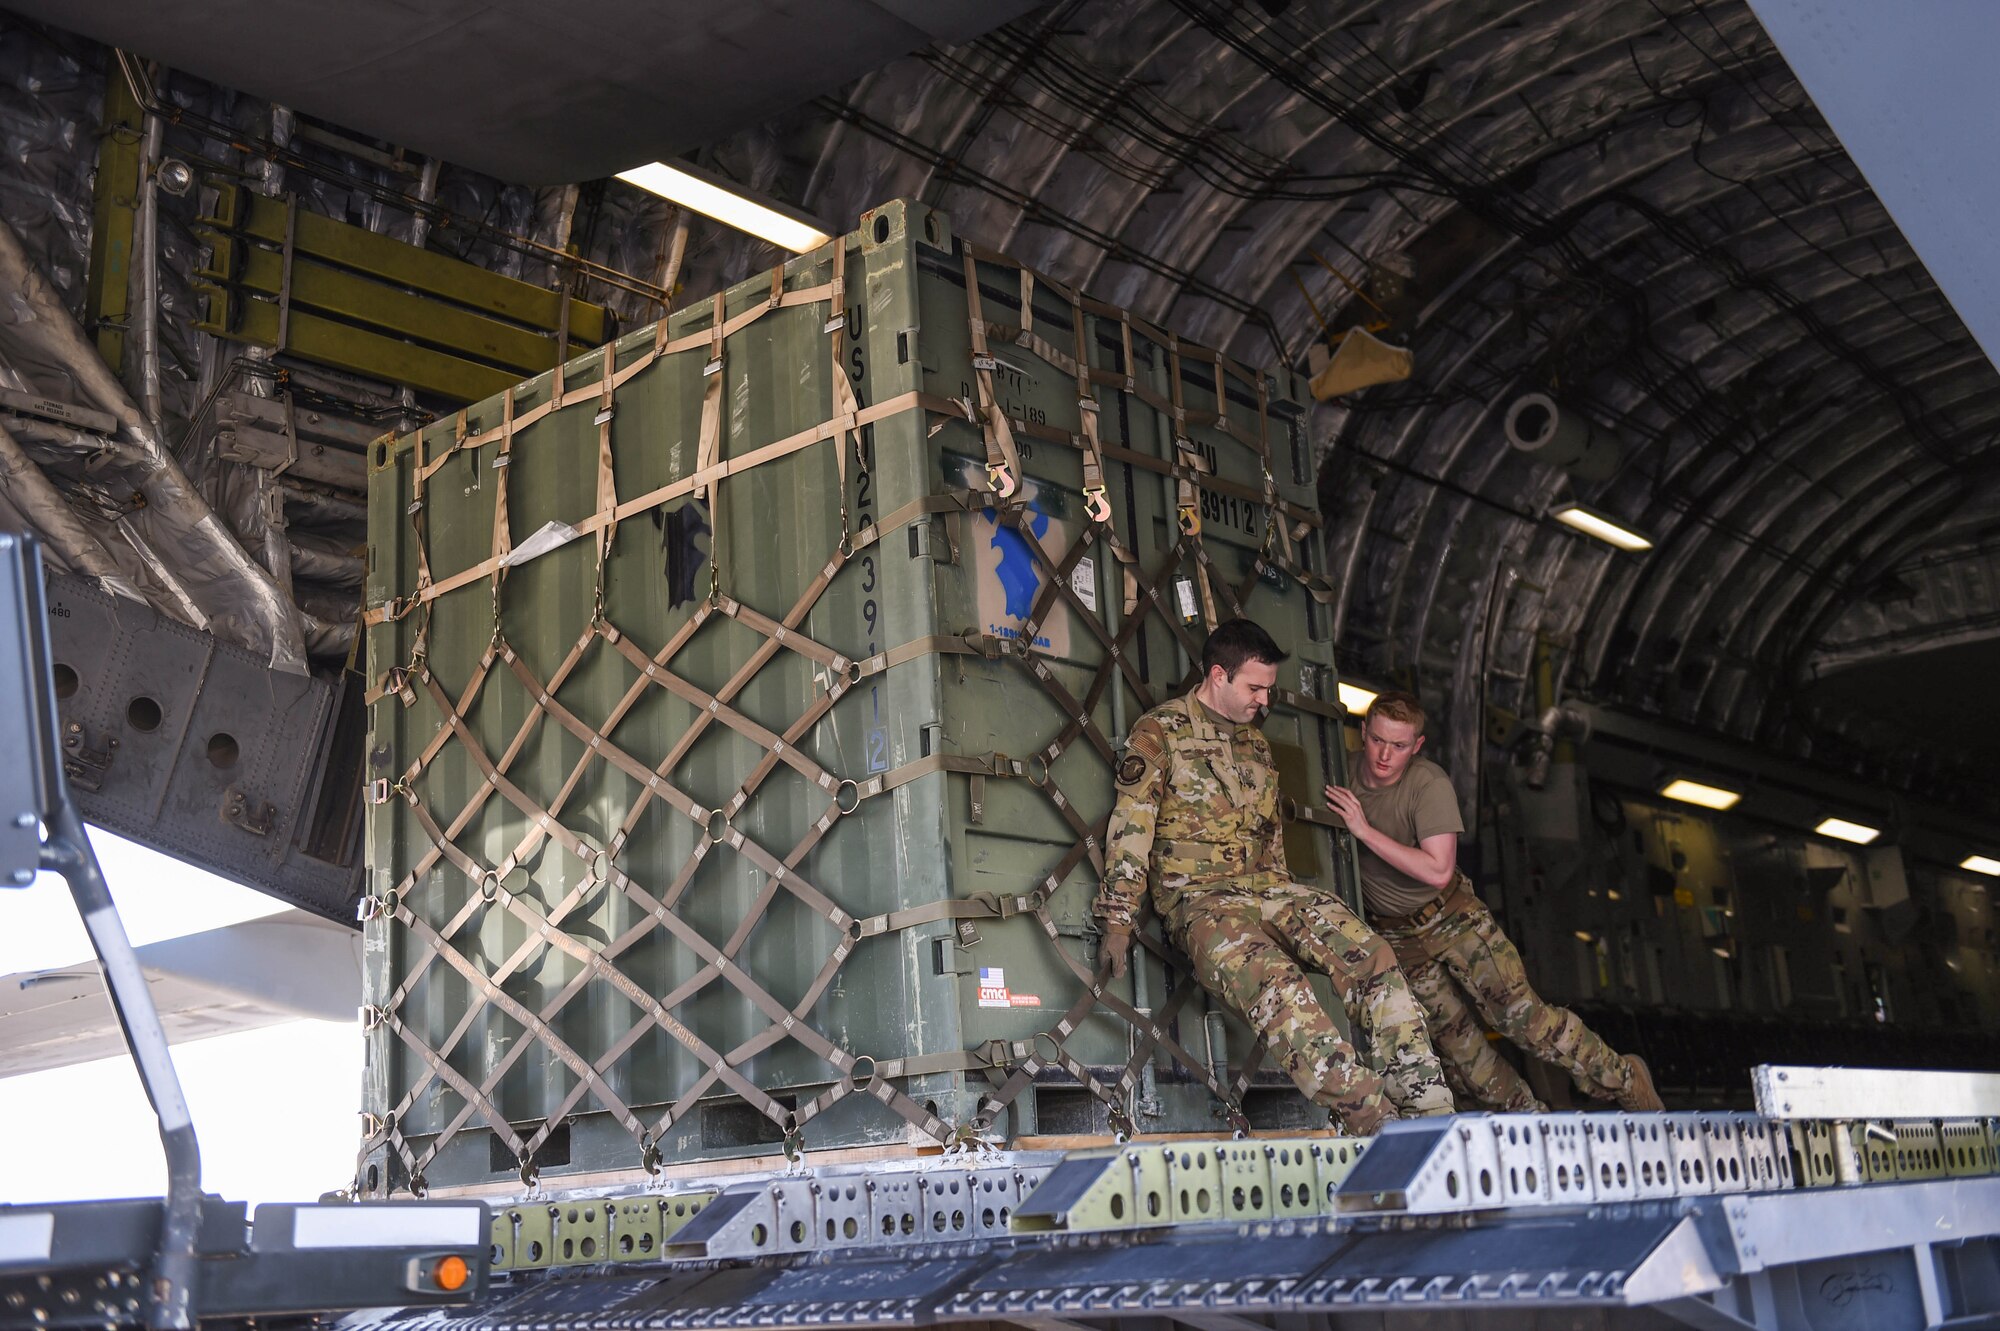 Master Sgt. Andrew Reilly and Airman 1st Class Kam Watt, 4th Airlift Squadron loadmasters, offload a piece of cargo from a C-17 Globemaster III in Kuwait, Dec. 18, 2019. The C-17 is eqipped with multi-directional rollers in the floor to aid in the on and off-load of cargo. (U.S. Air Force photo by Airman 1st Class Mikayla Heineck)